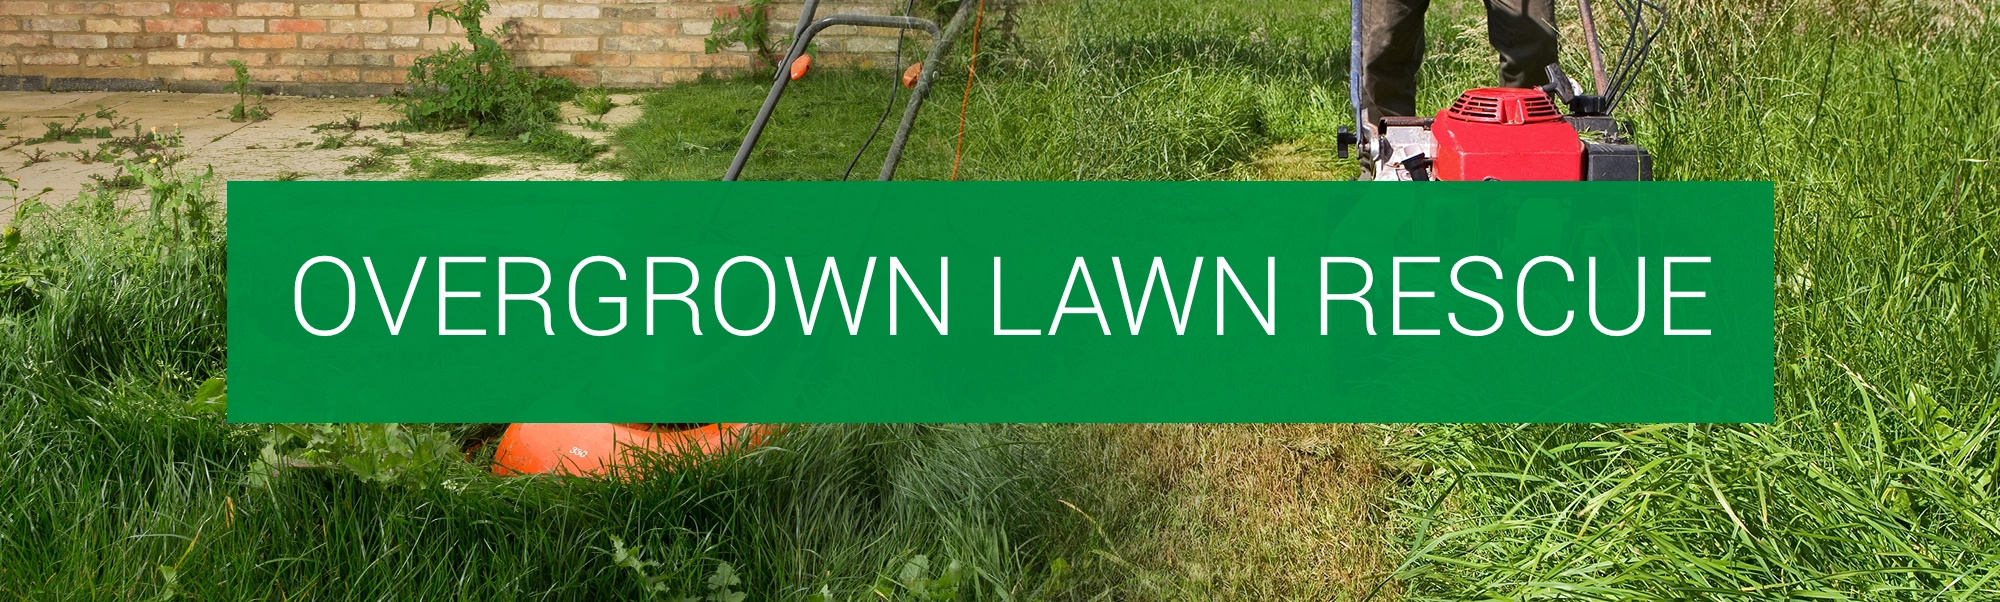 Lawn Care Services in Illinois - Overgrown Lawn Rescue